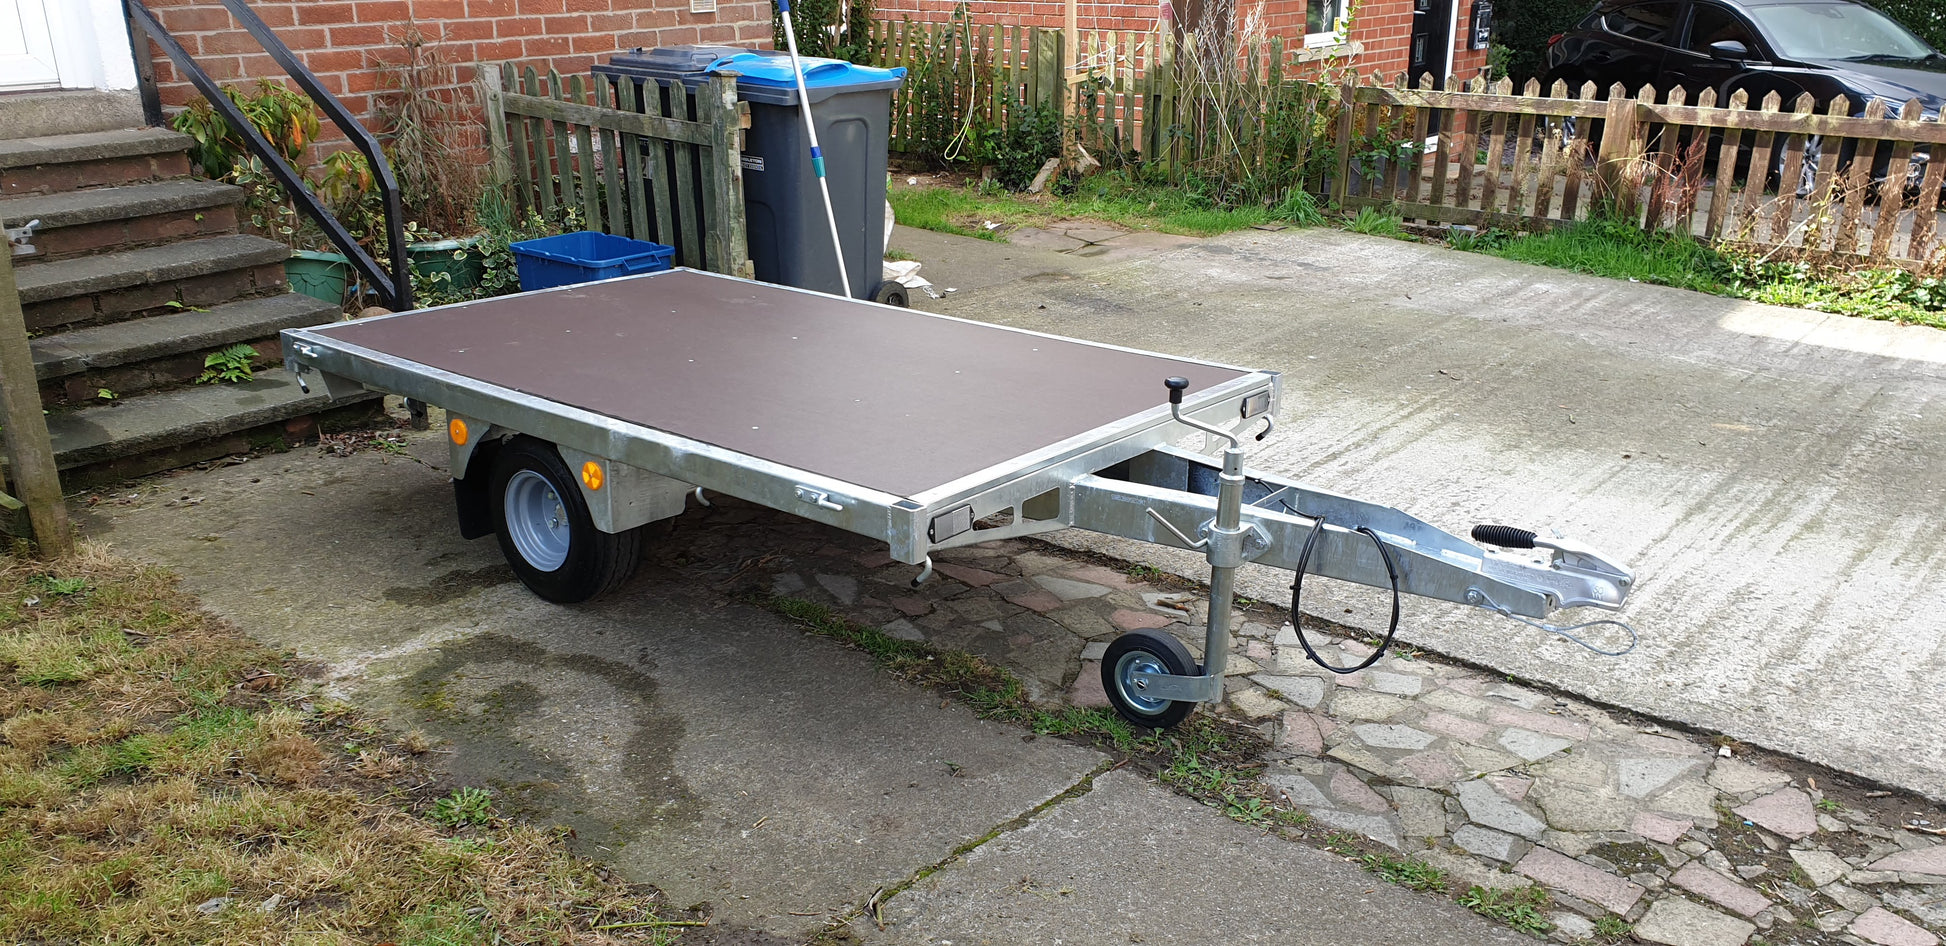 Trailer stripped ready for Standard pod build